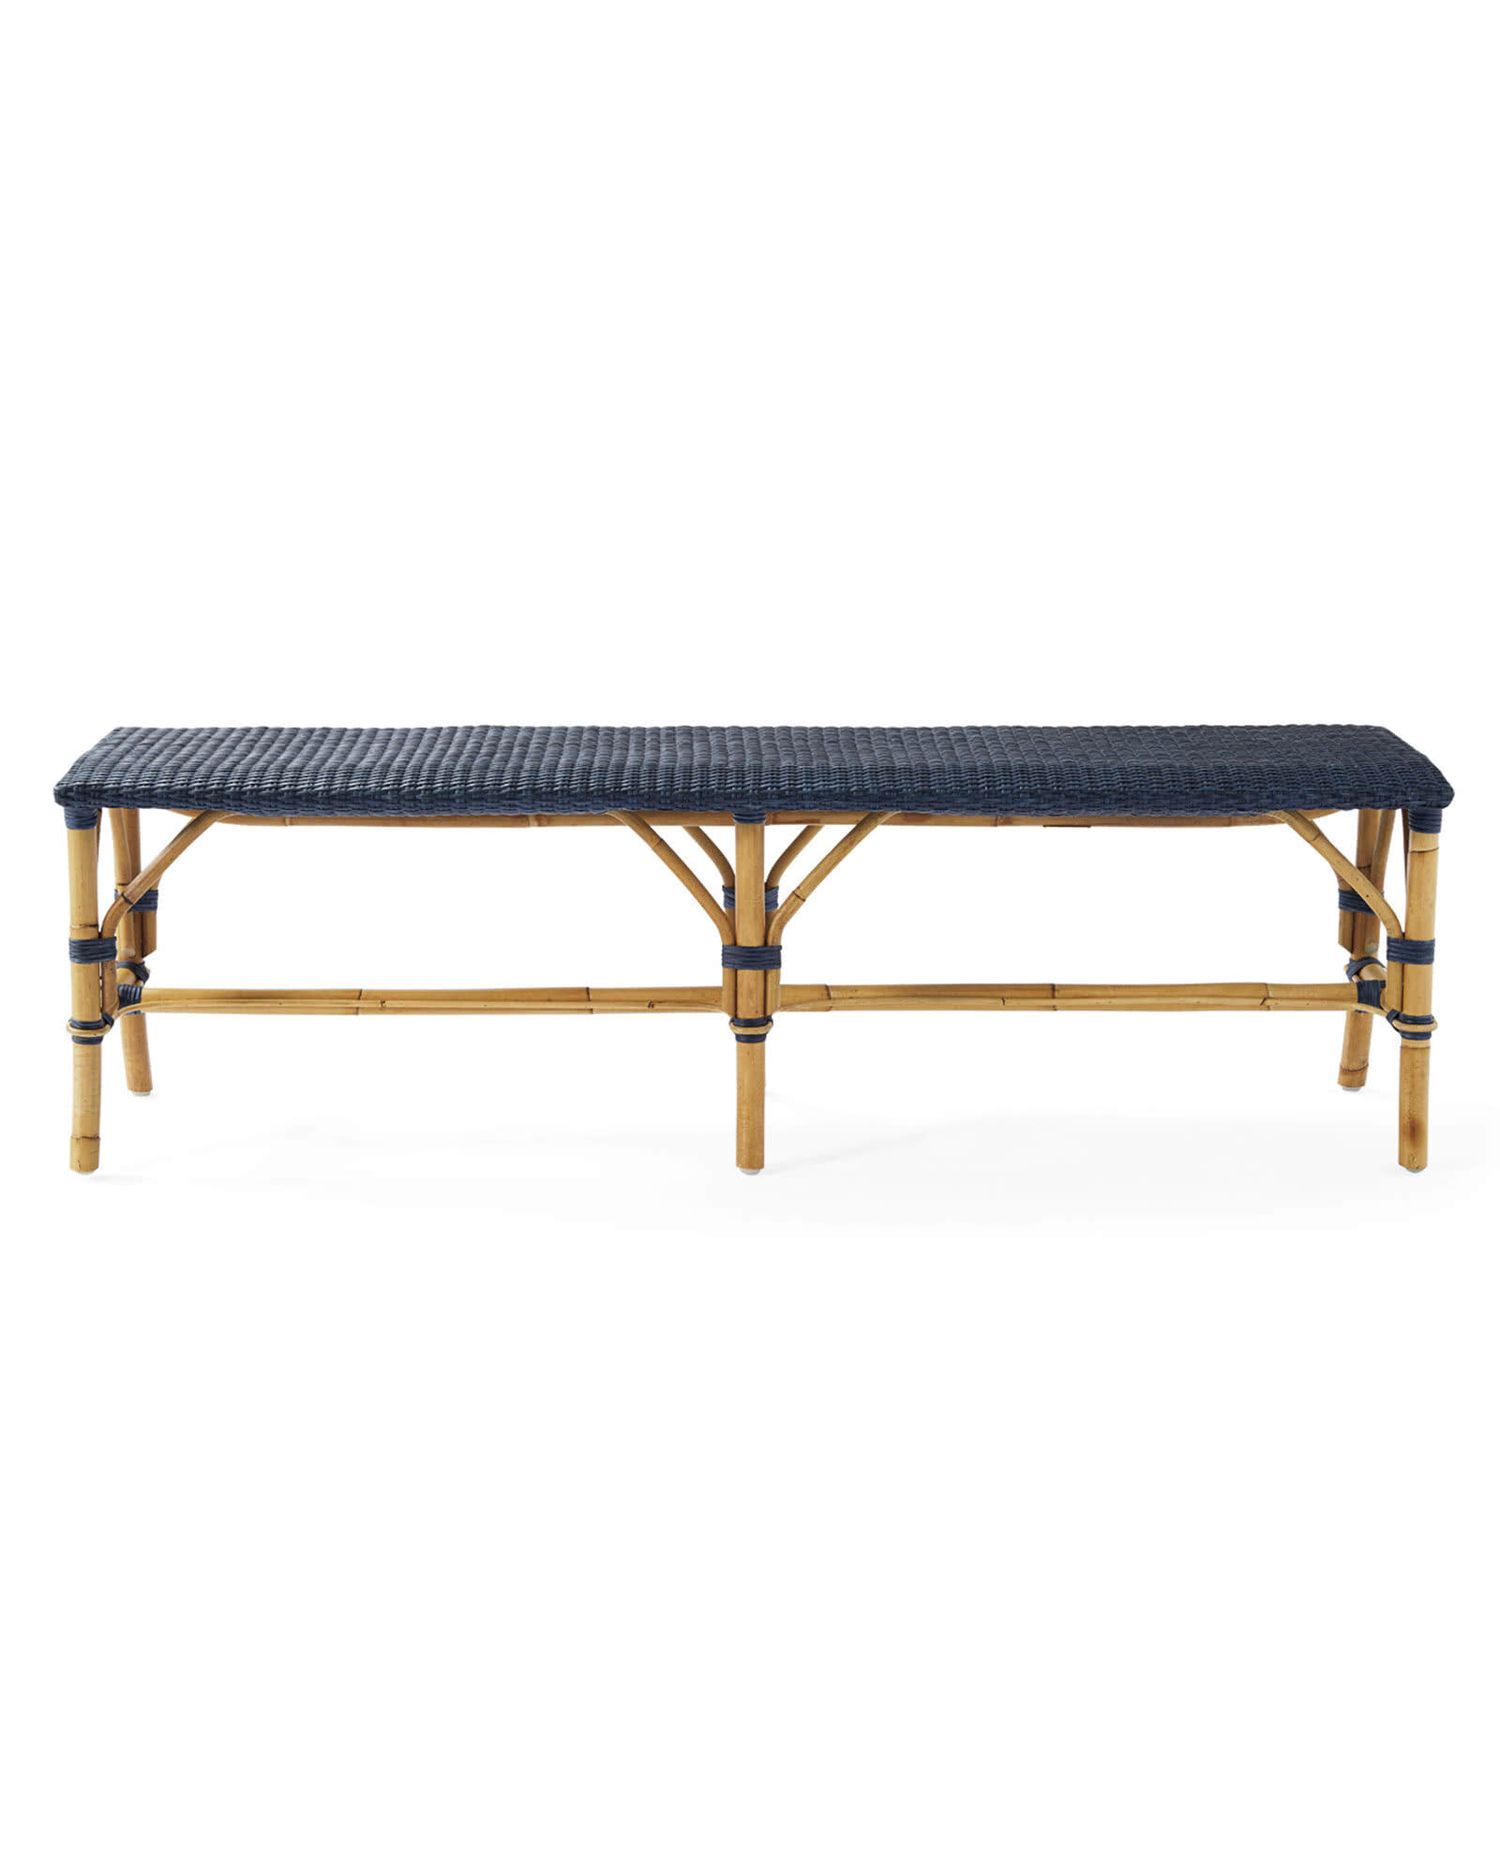 Shop Sunwashed Riviera Backless Bench from Serena & Lily on Openhaus